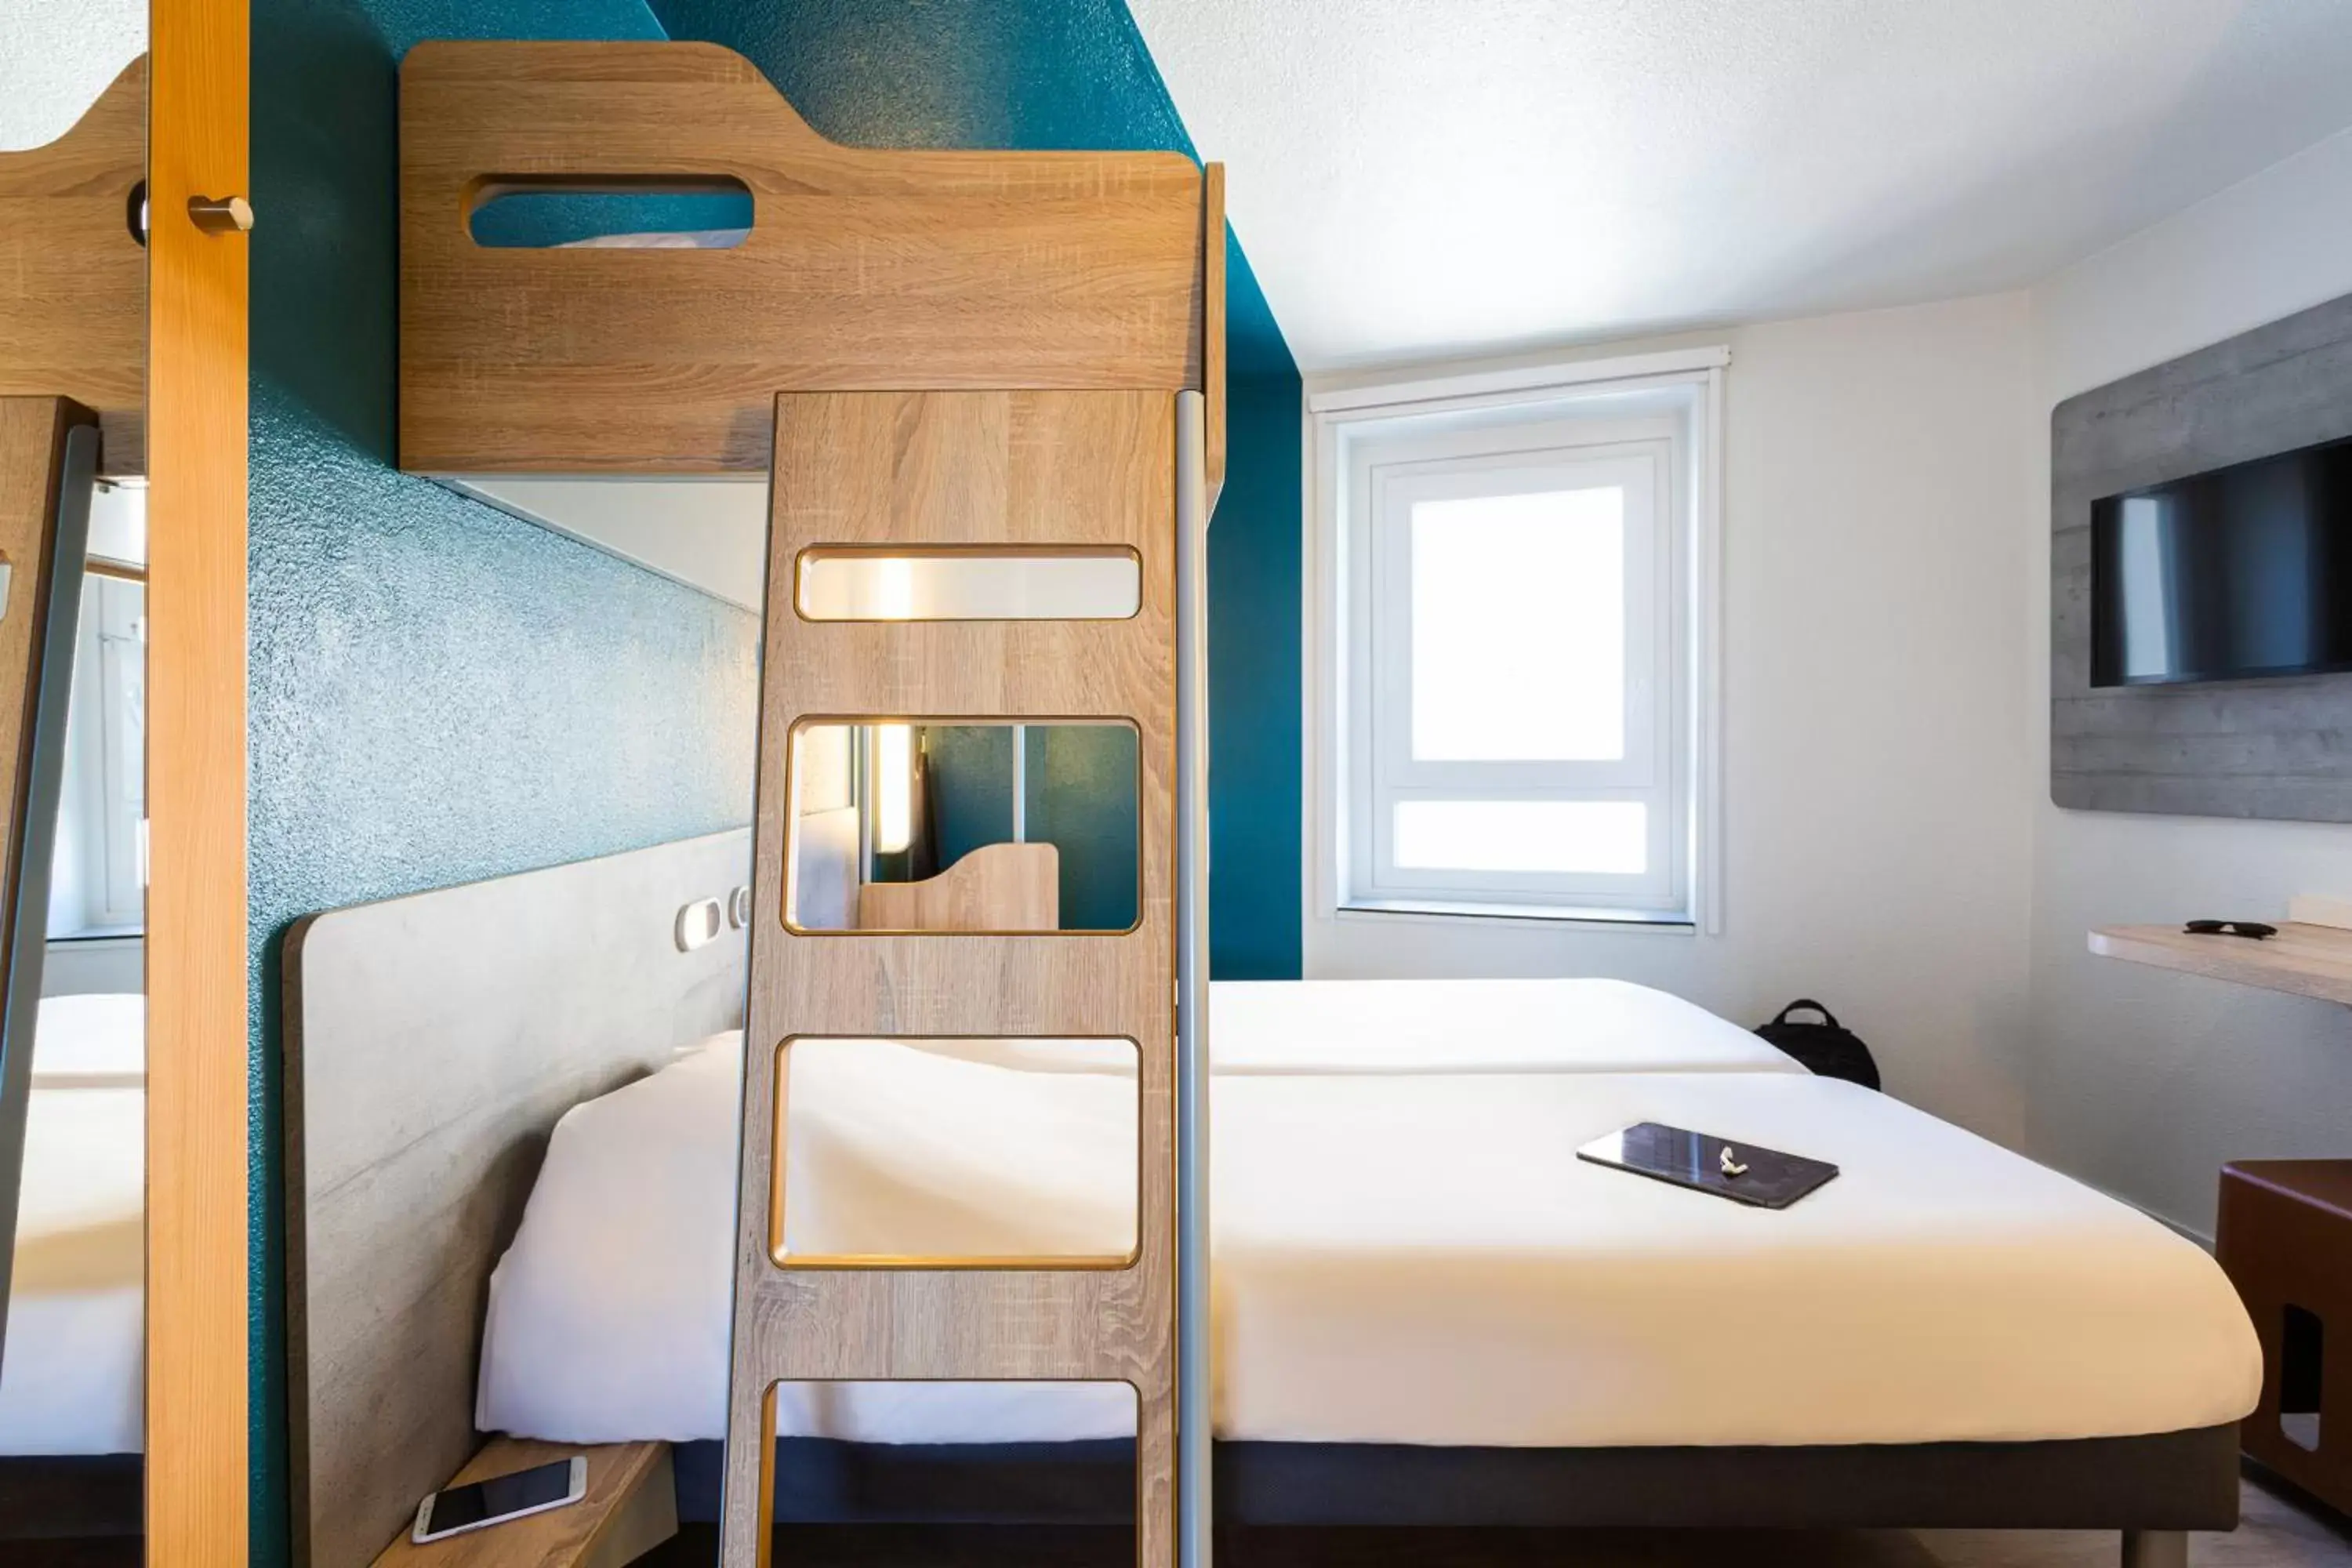 Triple Room with Two Single Beds and One Bunk Bed in ibis budget Bordeaux Centre - Gare Saint Jean